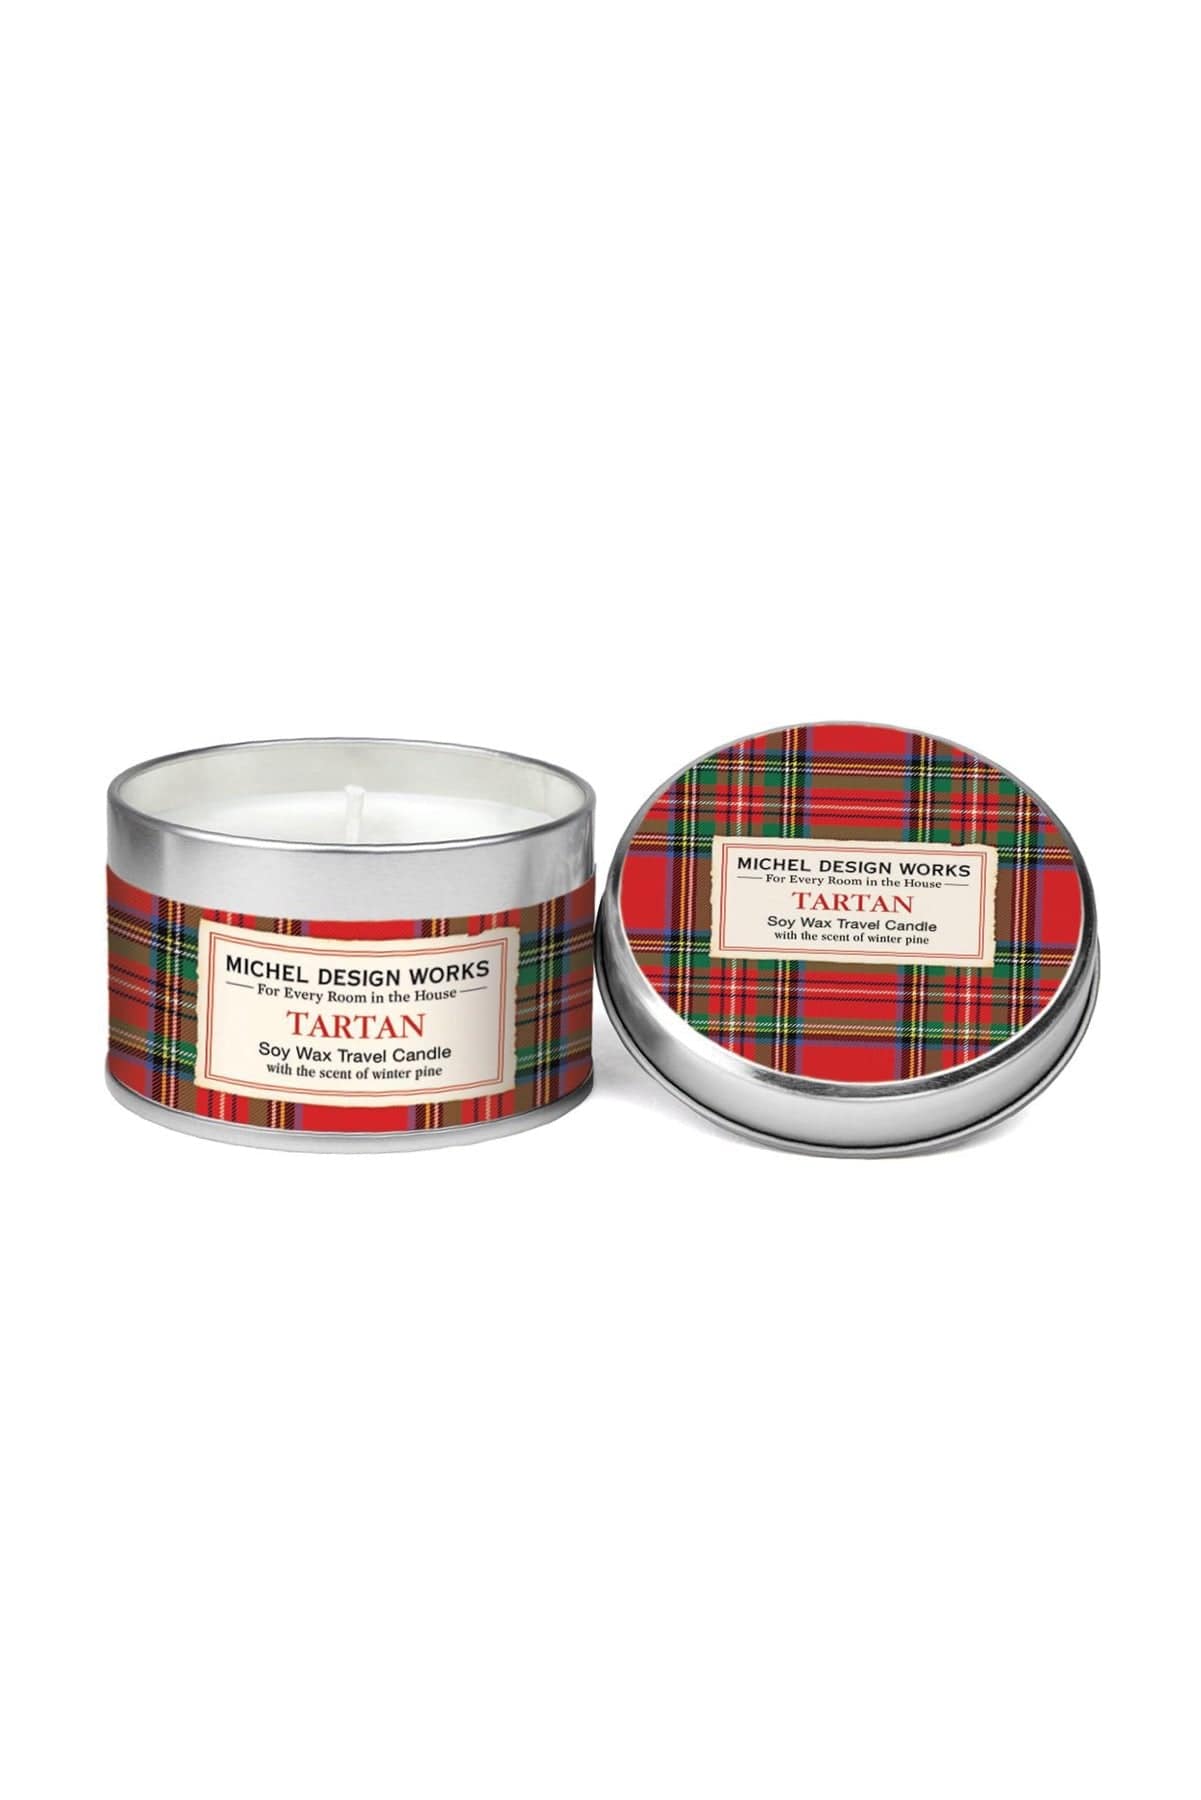 Tartan Soy Wax Travel Candle Michel Design Works Candles